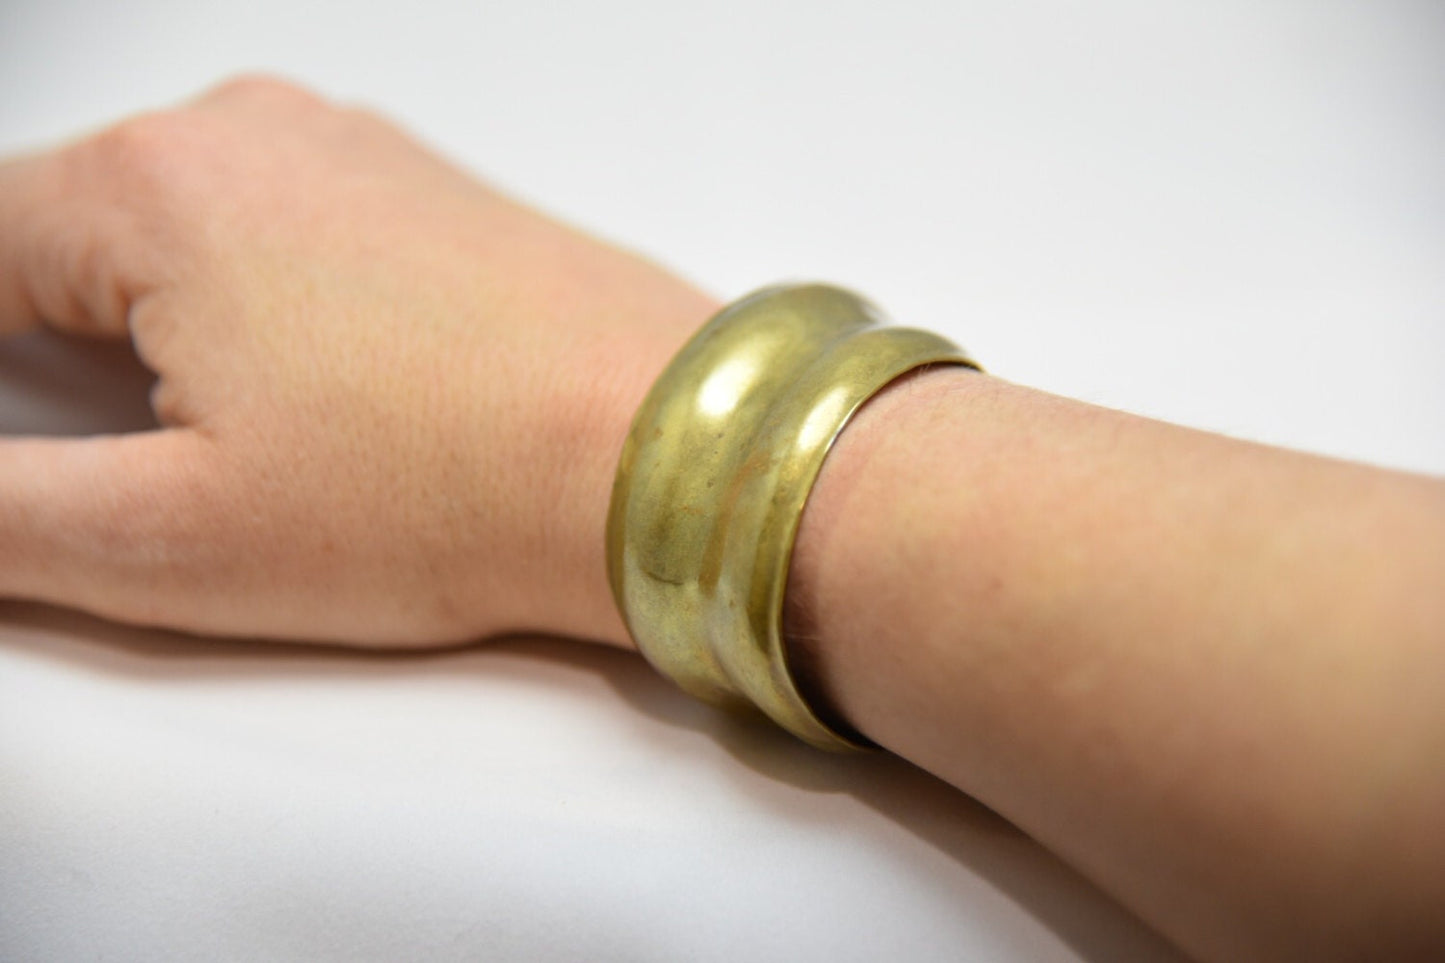 SALE Vintage Asymmetrical Brass Cuff Bracelet, hand hammered and formed c.1960